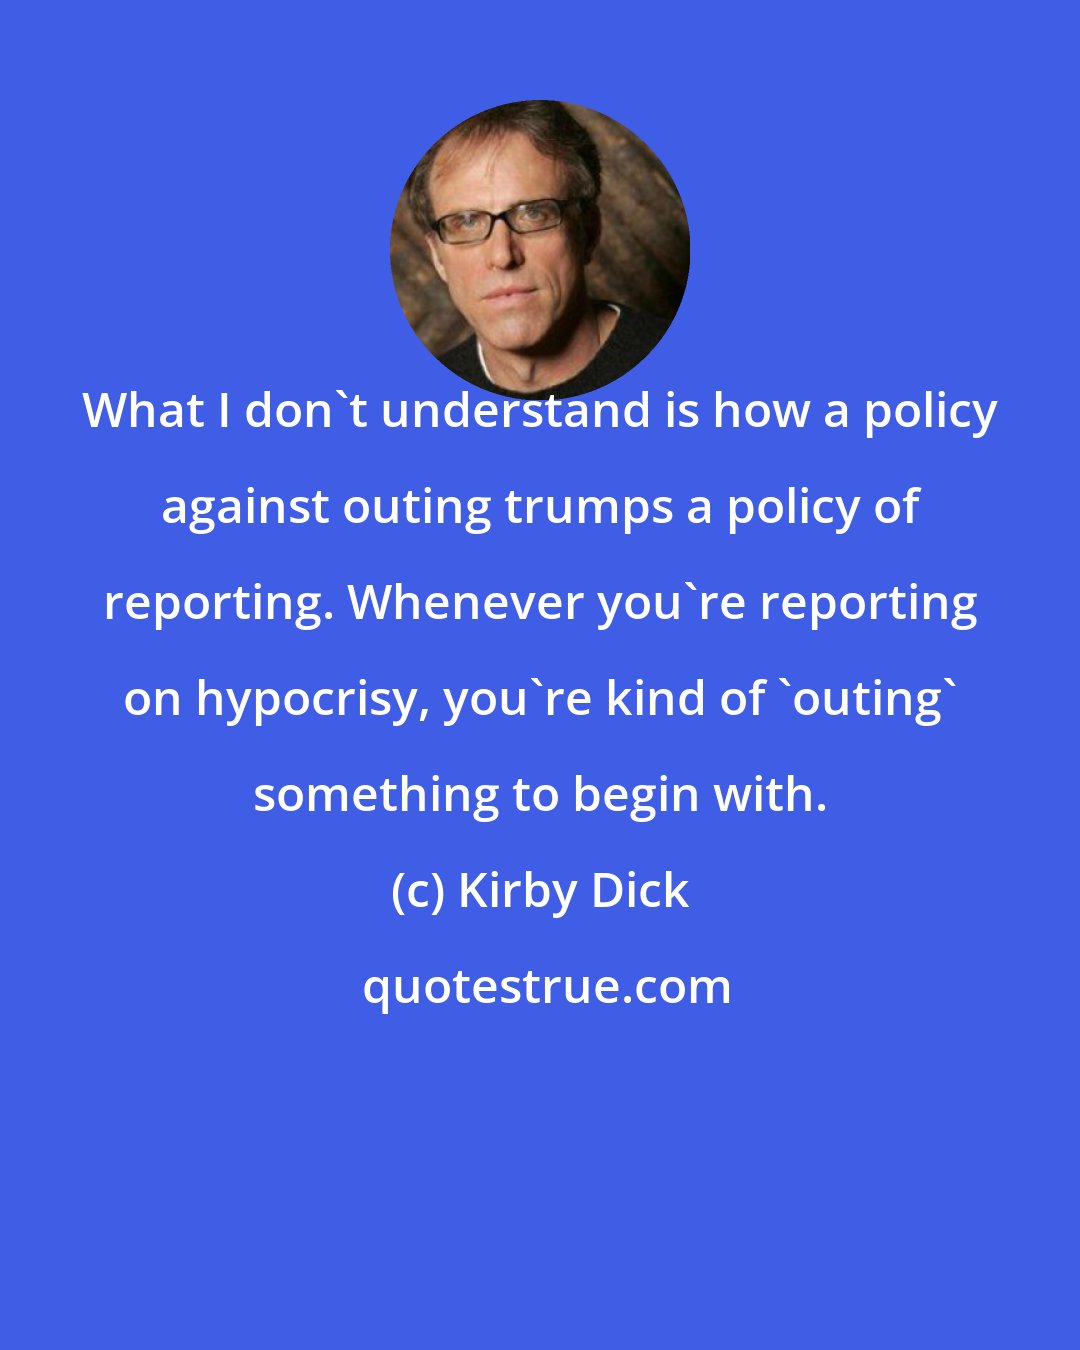 Kirby Dick: What I don't understand is how a policy against outing trumps a policy of reporting. Whenever you're reporting on hypocrisy, you're kind of 'outing' something to begin with.